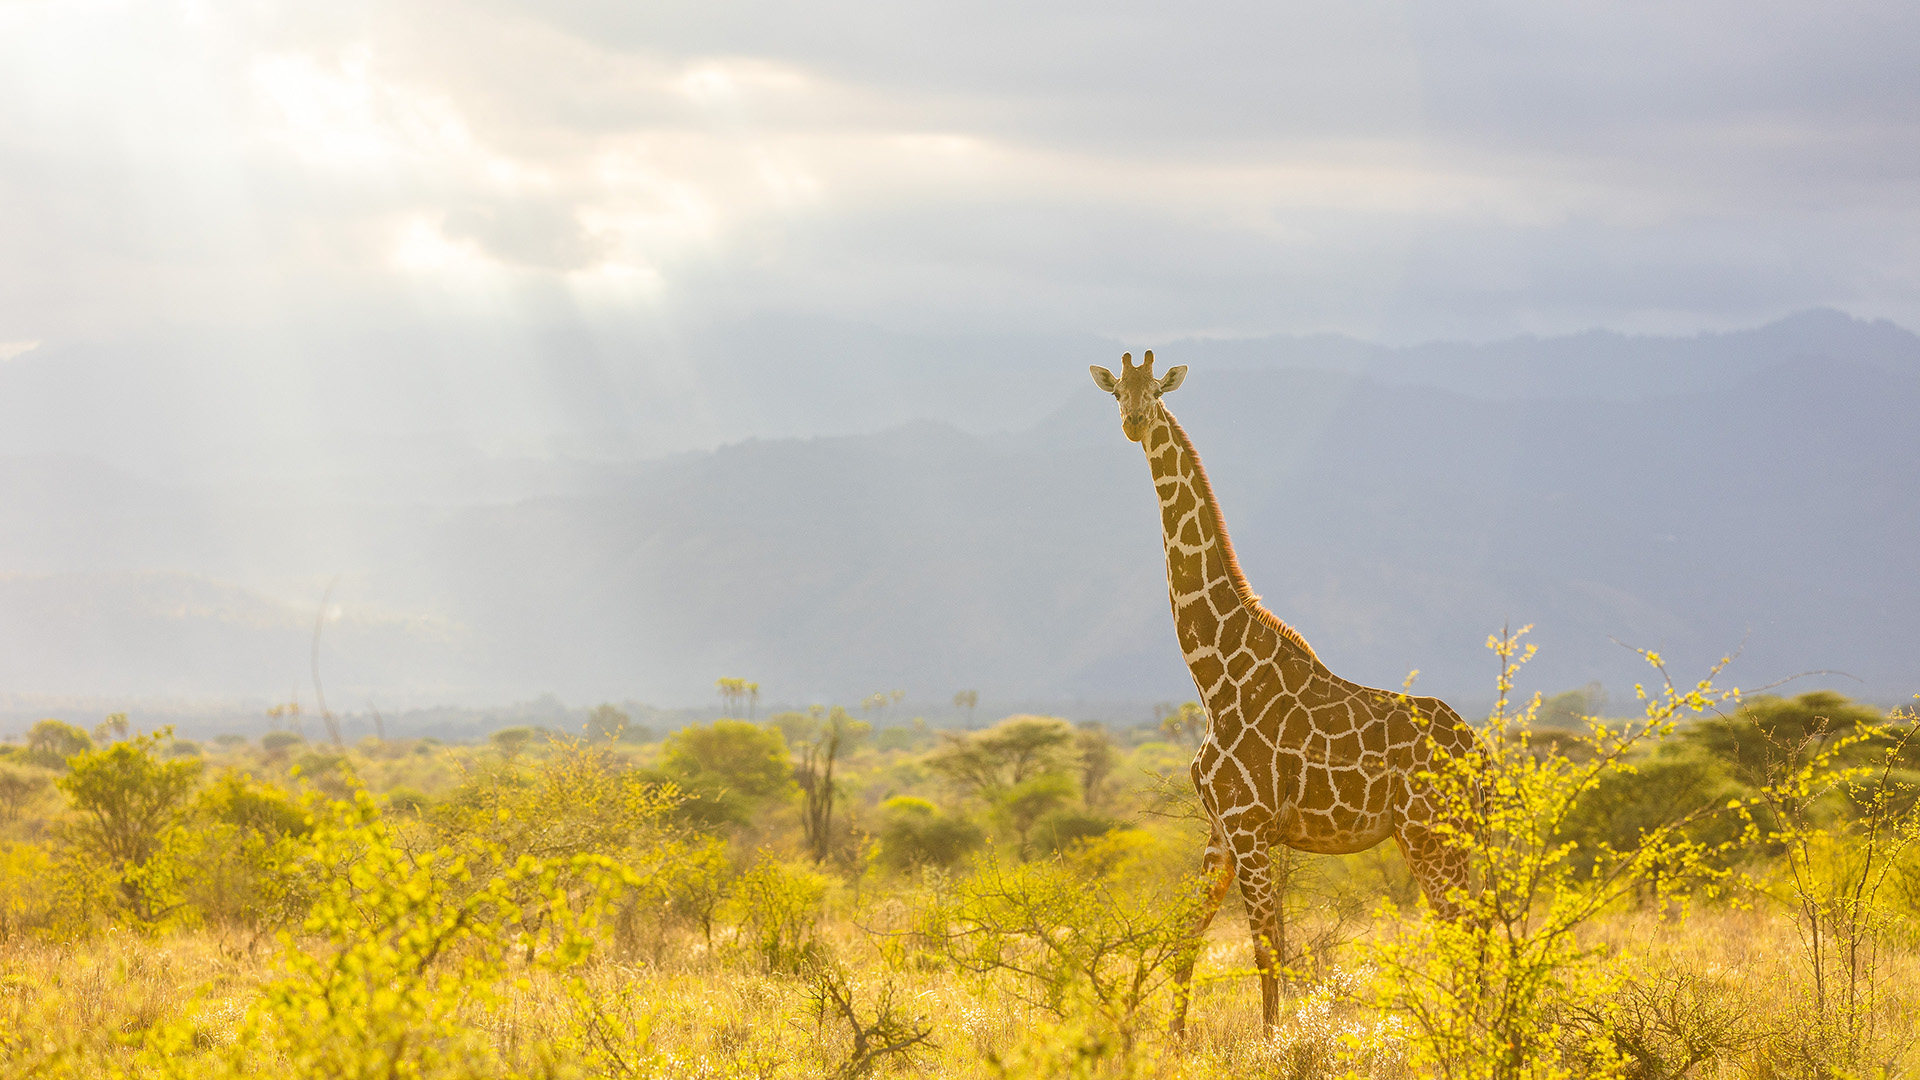 Landscape image of a giraffe with sun breaking through the clouds